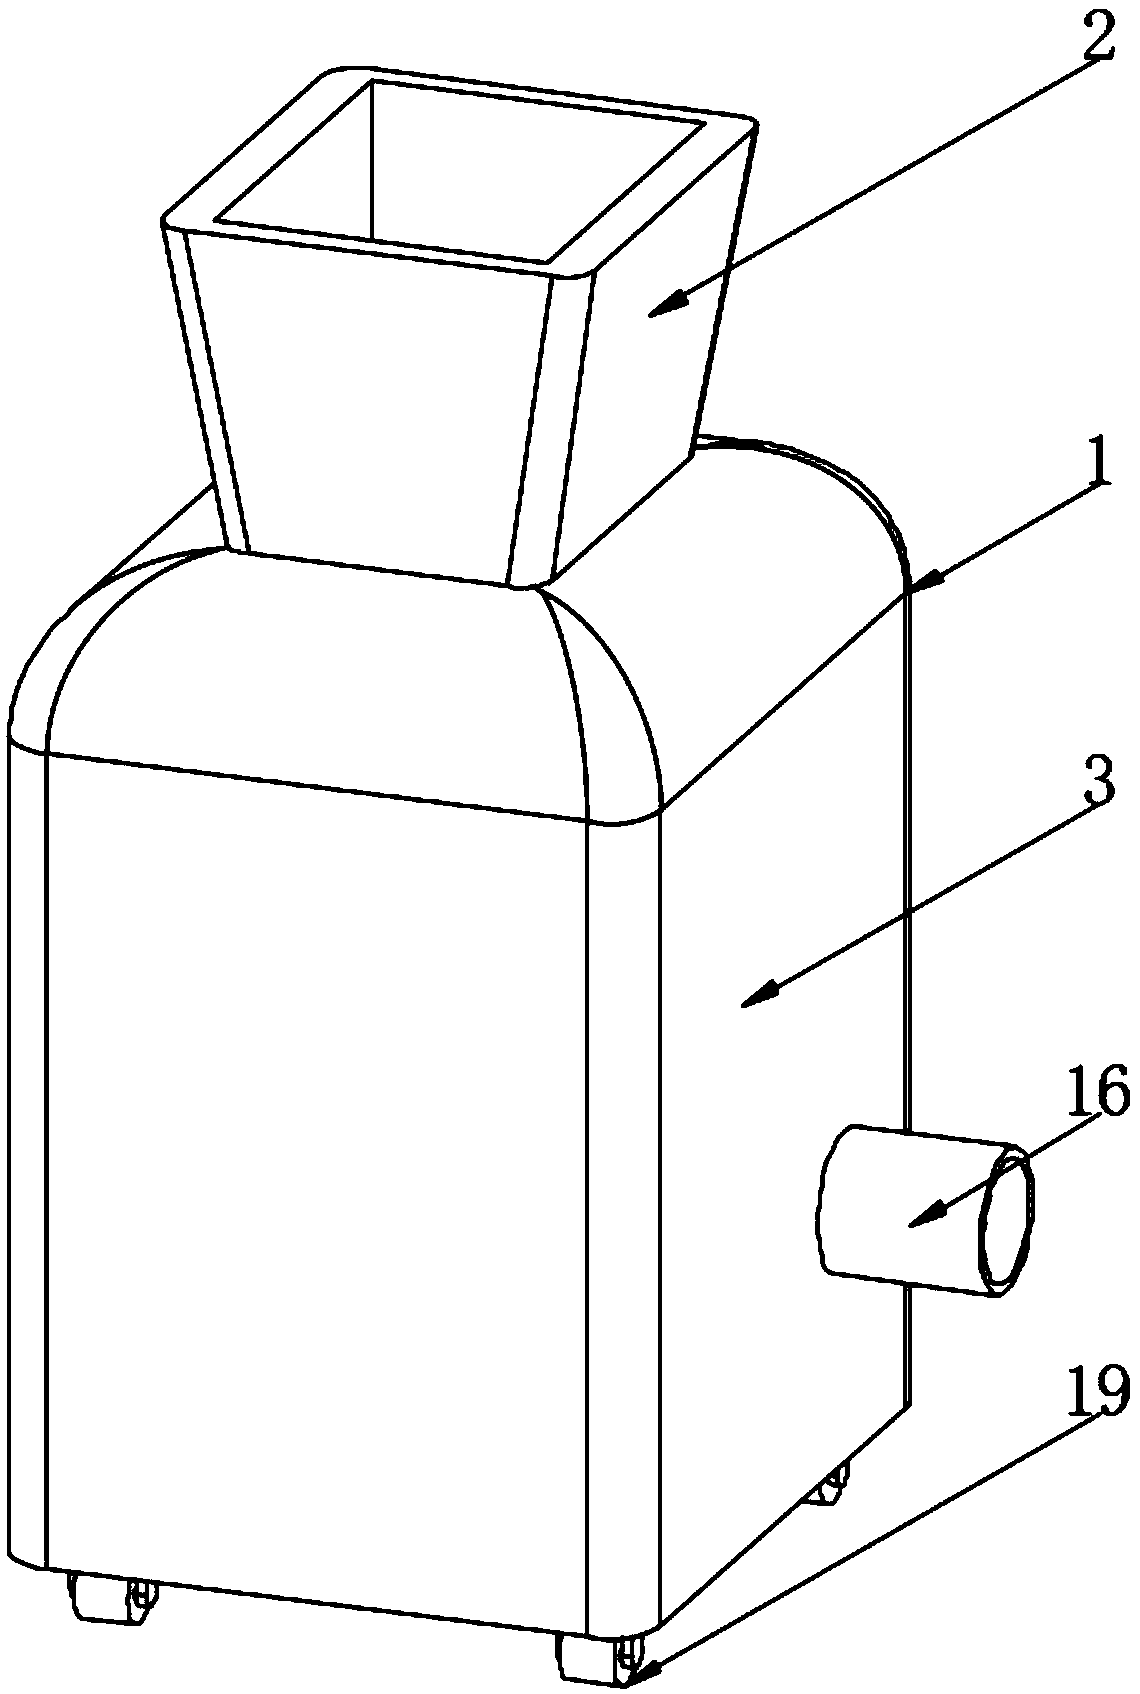 Agricultural straw smashing device